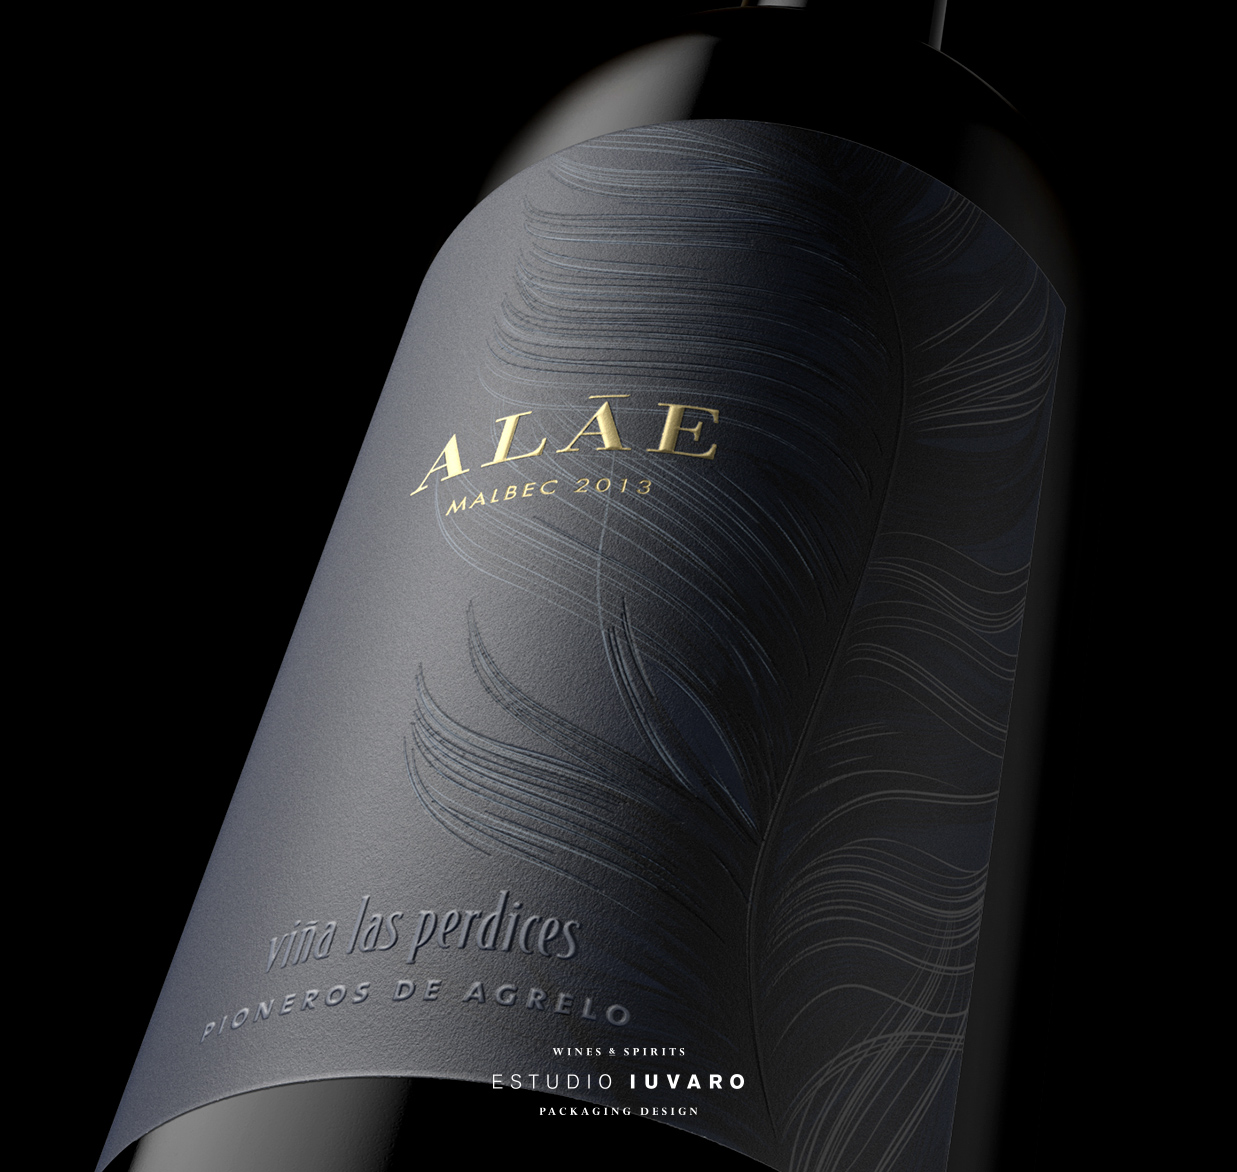 Modern and Elegant Design for an Emblematic Wine